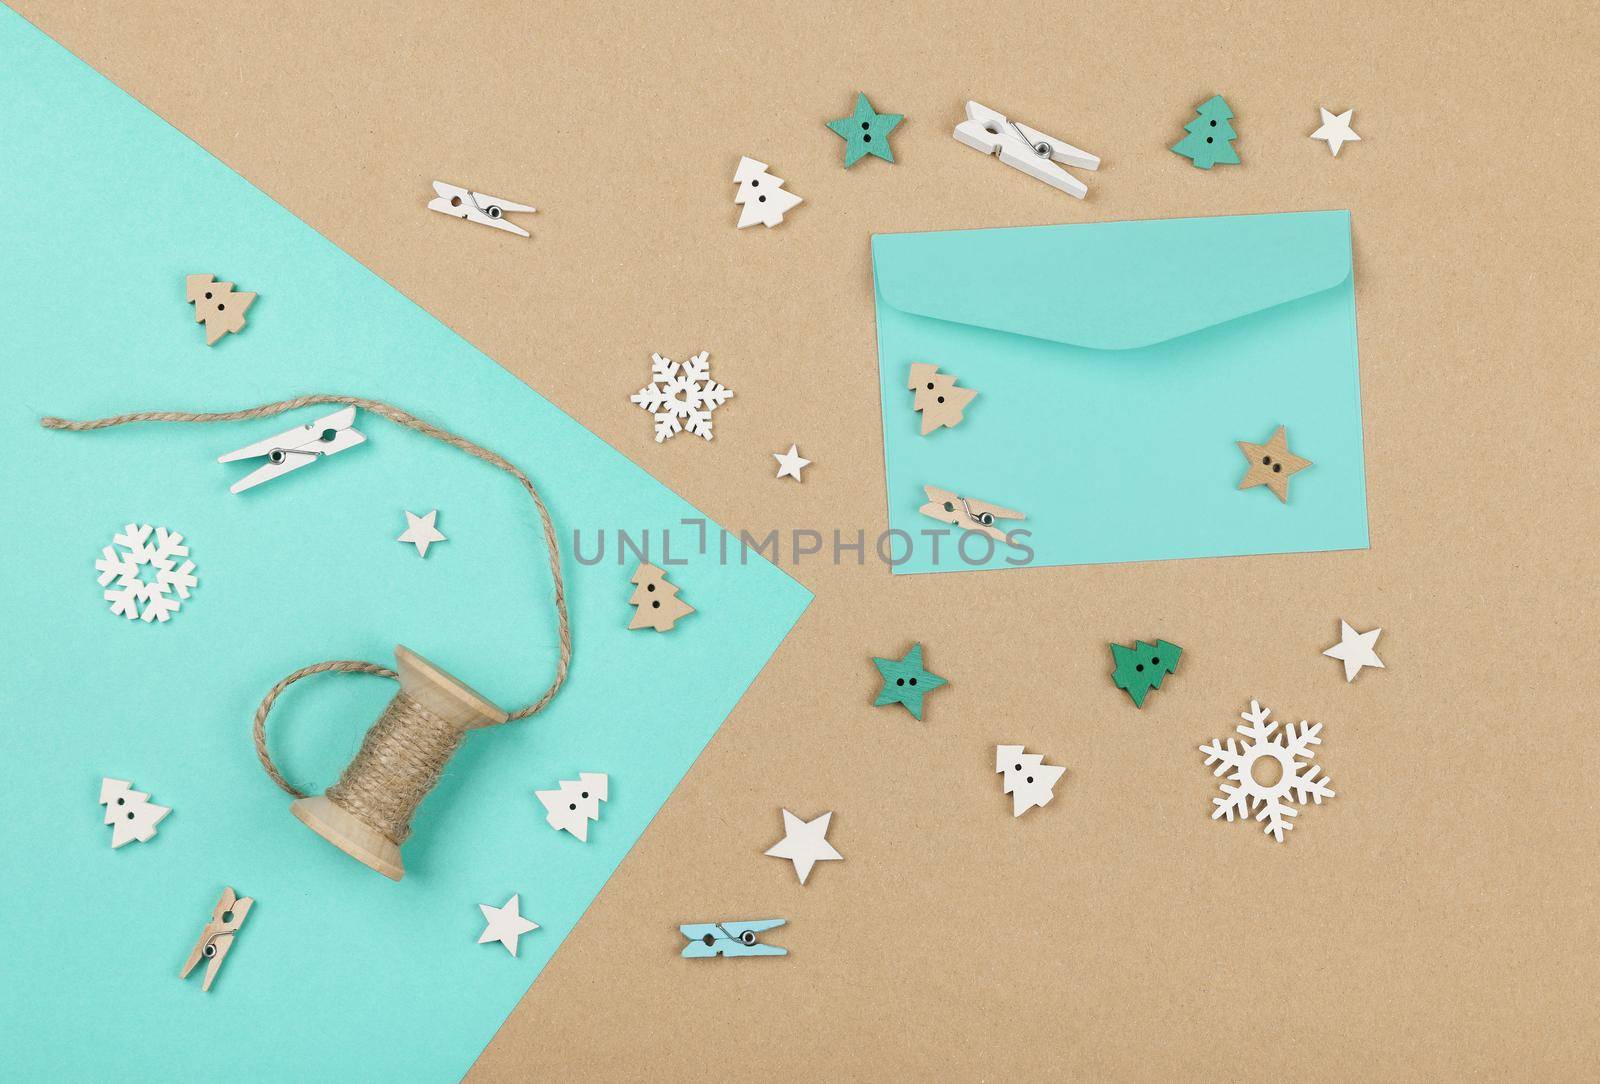 Close up packing and wrapping Christmas gifts with blue and brown paper, table top view, flat lay